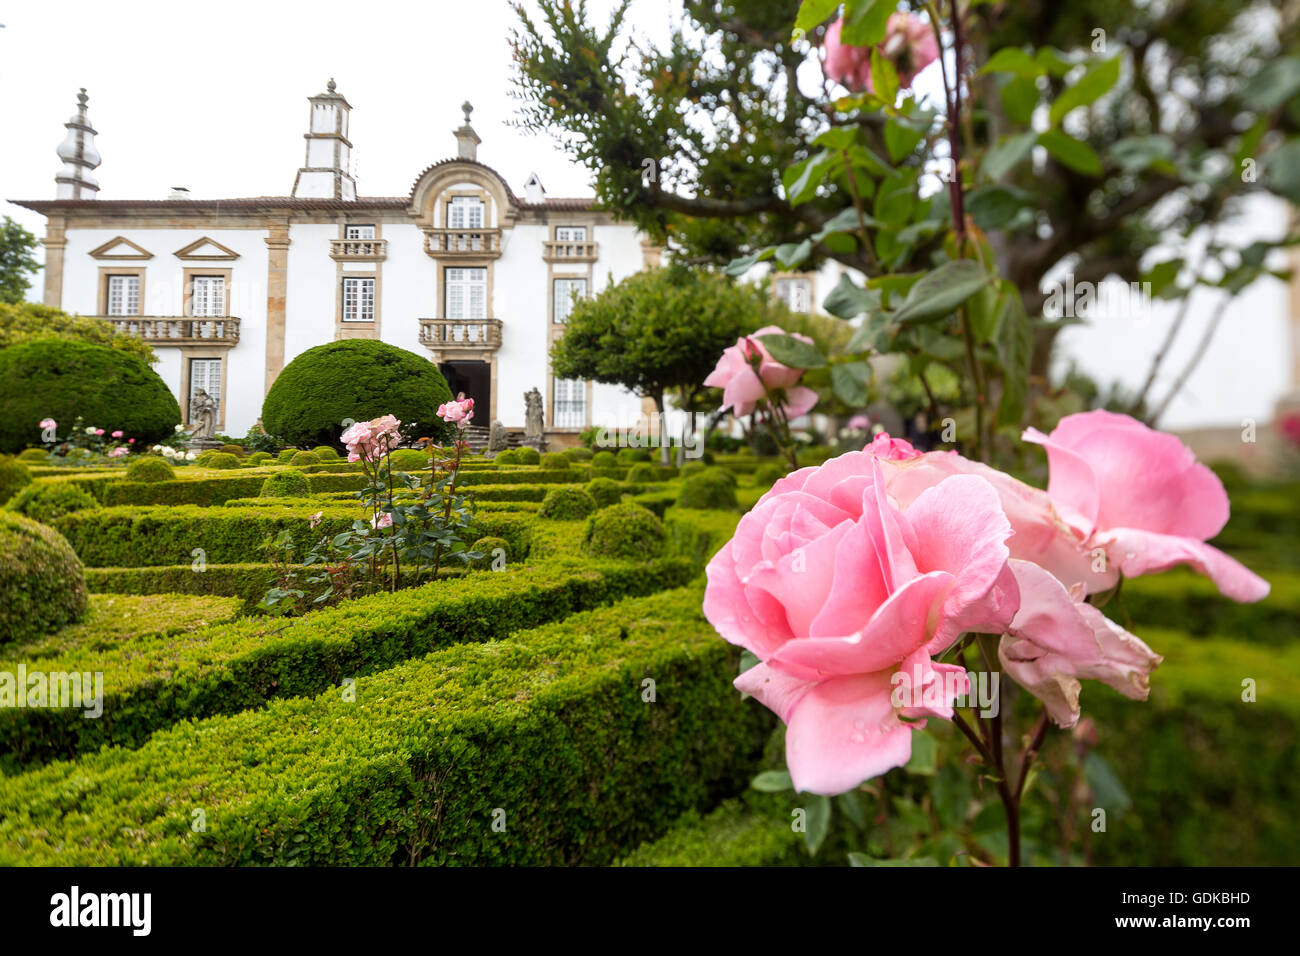 landscaped gardens of the palace, pink rose blossom, Casa de Mateus, palace with large gardens, Vila Real, Vila Real District,, Stock Photo